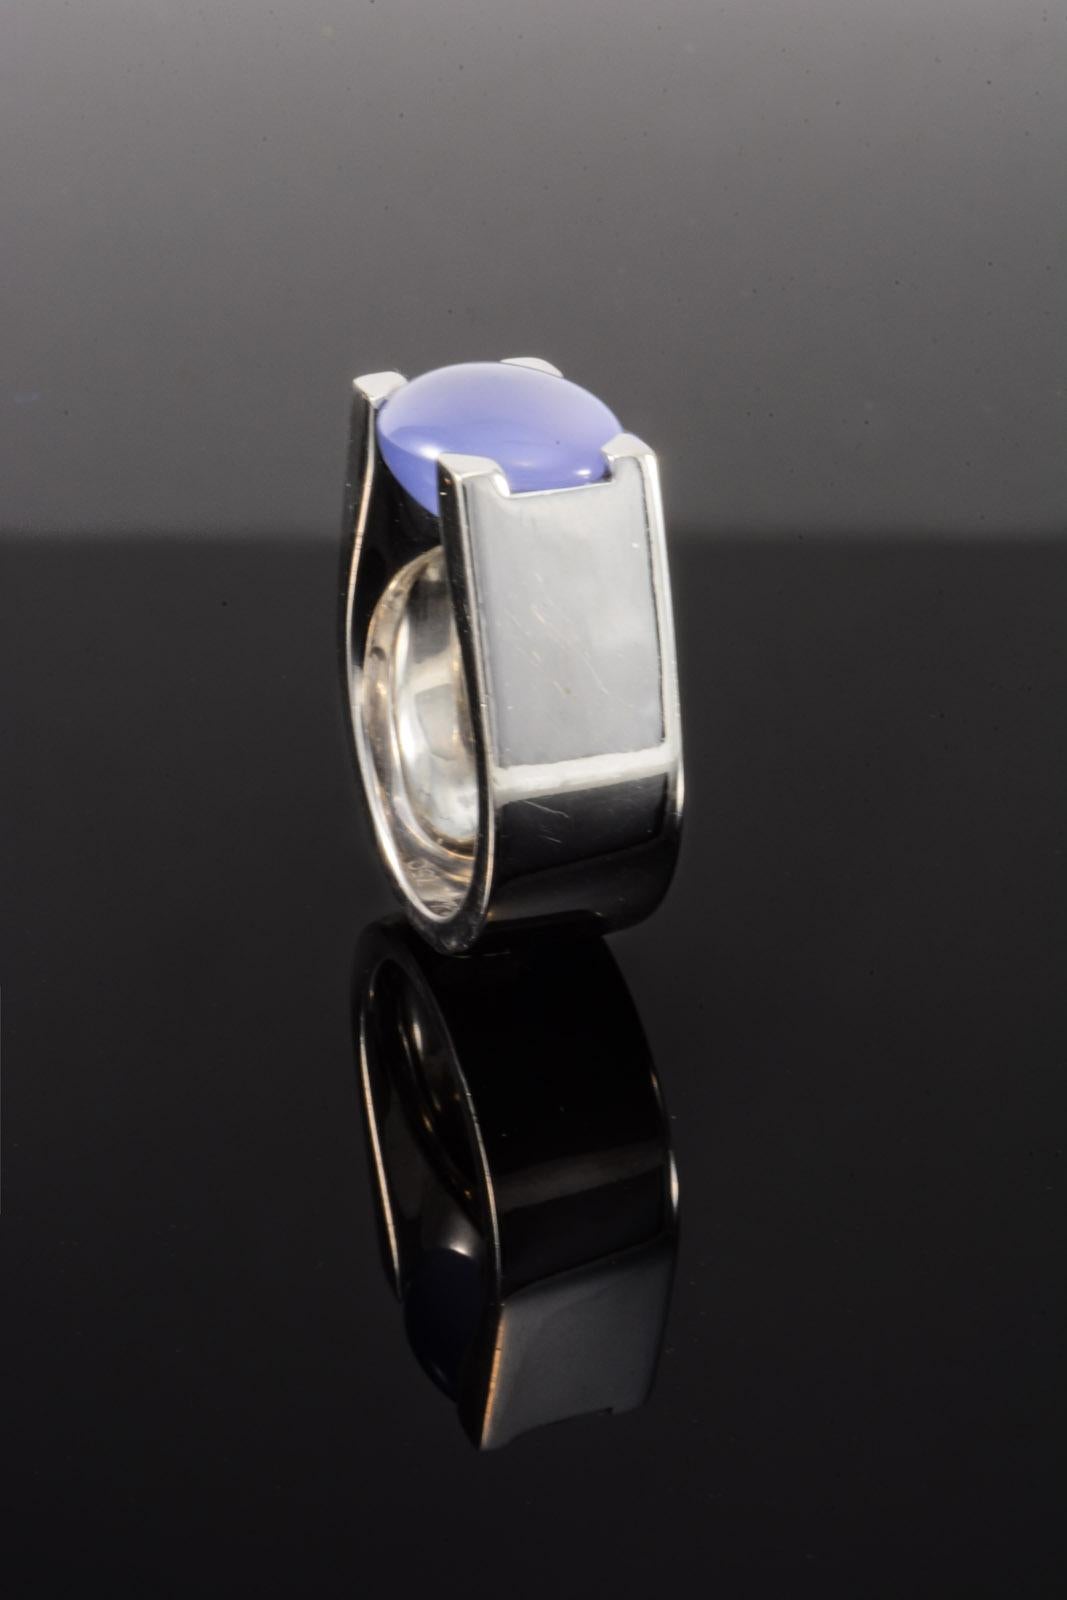 This is a genuine signed Cartier oval Baby Blue Chalcedony designer Ring. It is expertly hewn from solid high polish 18 karat white Gold and features a thick flat edge shank with great heft that lets you know you're wearing quality. In the center